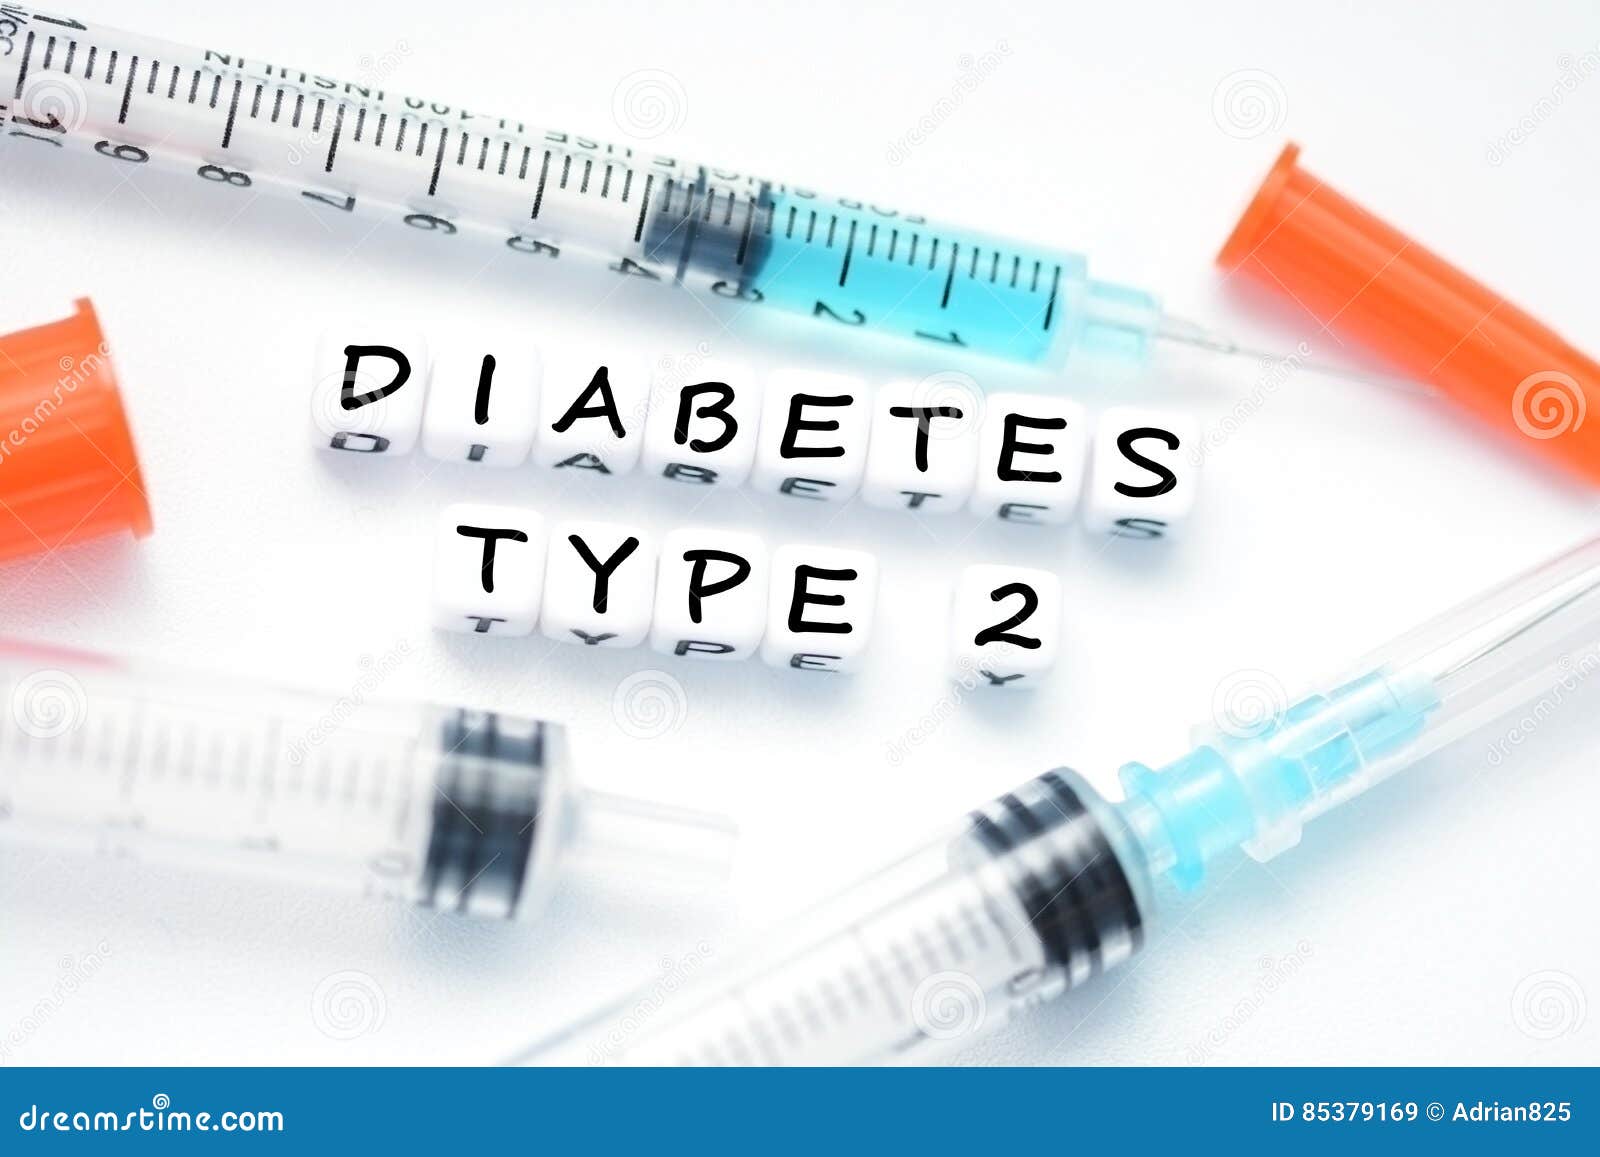 type 2 diabetes text spelled with plastic letter beads placed next to an insulin syringe